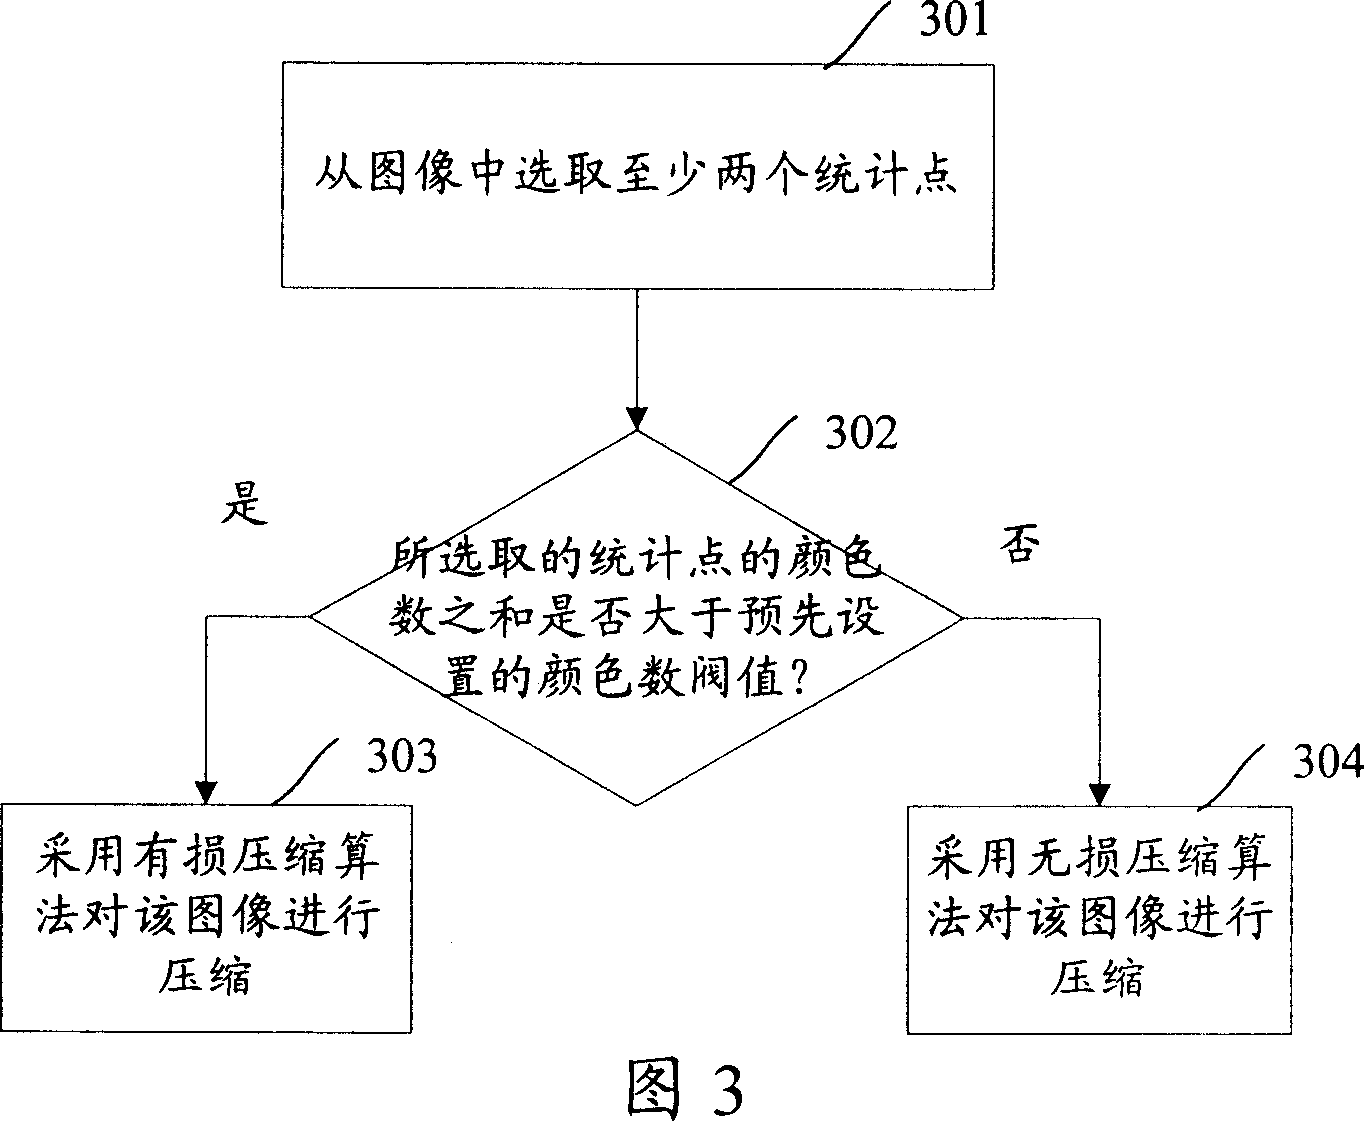 Method and device for compressing image